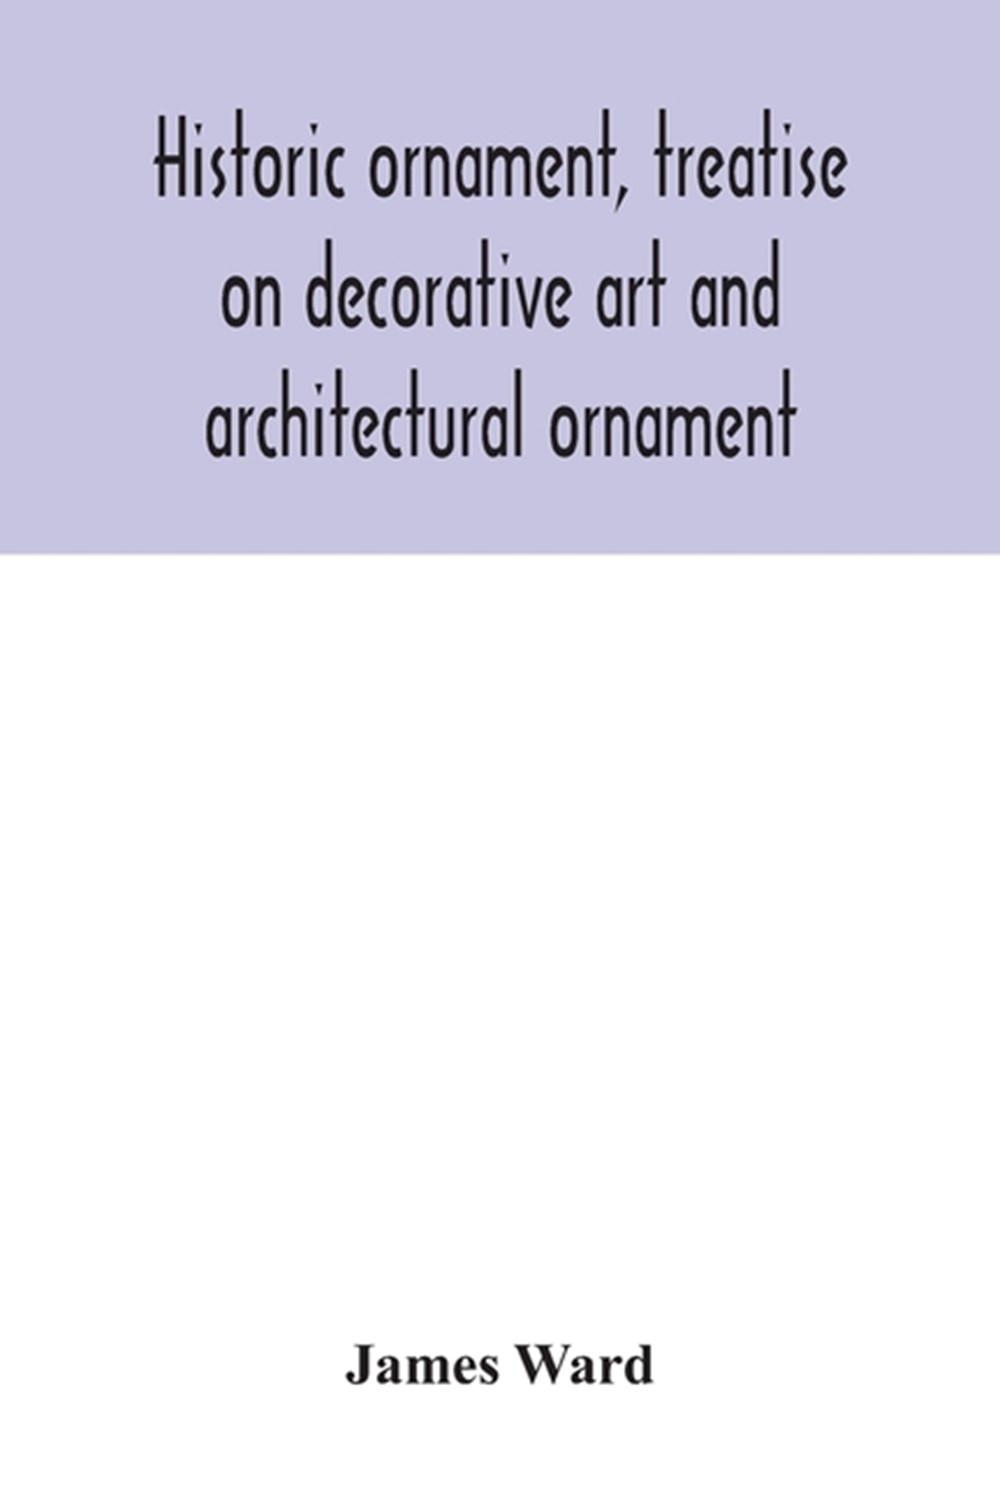 Historic ornament, treatise on decorative art and architectural ornament: Treats of Prehistoric Art;